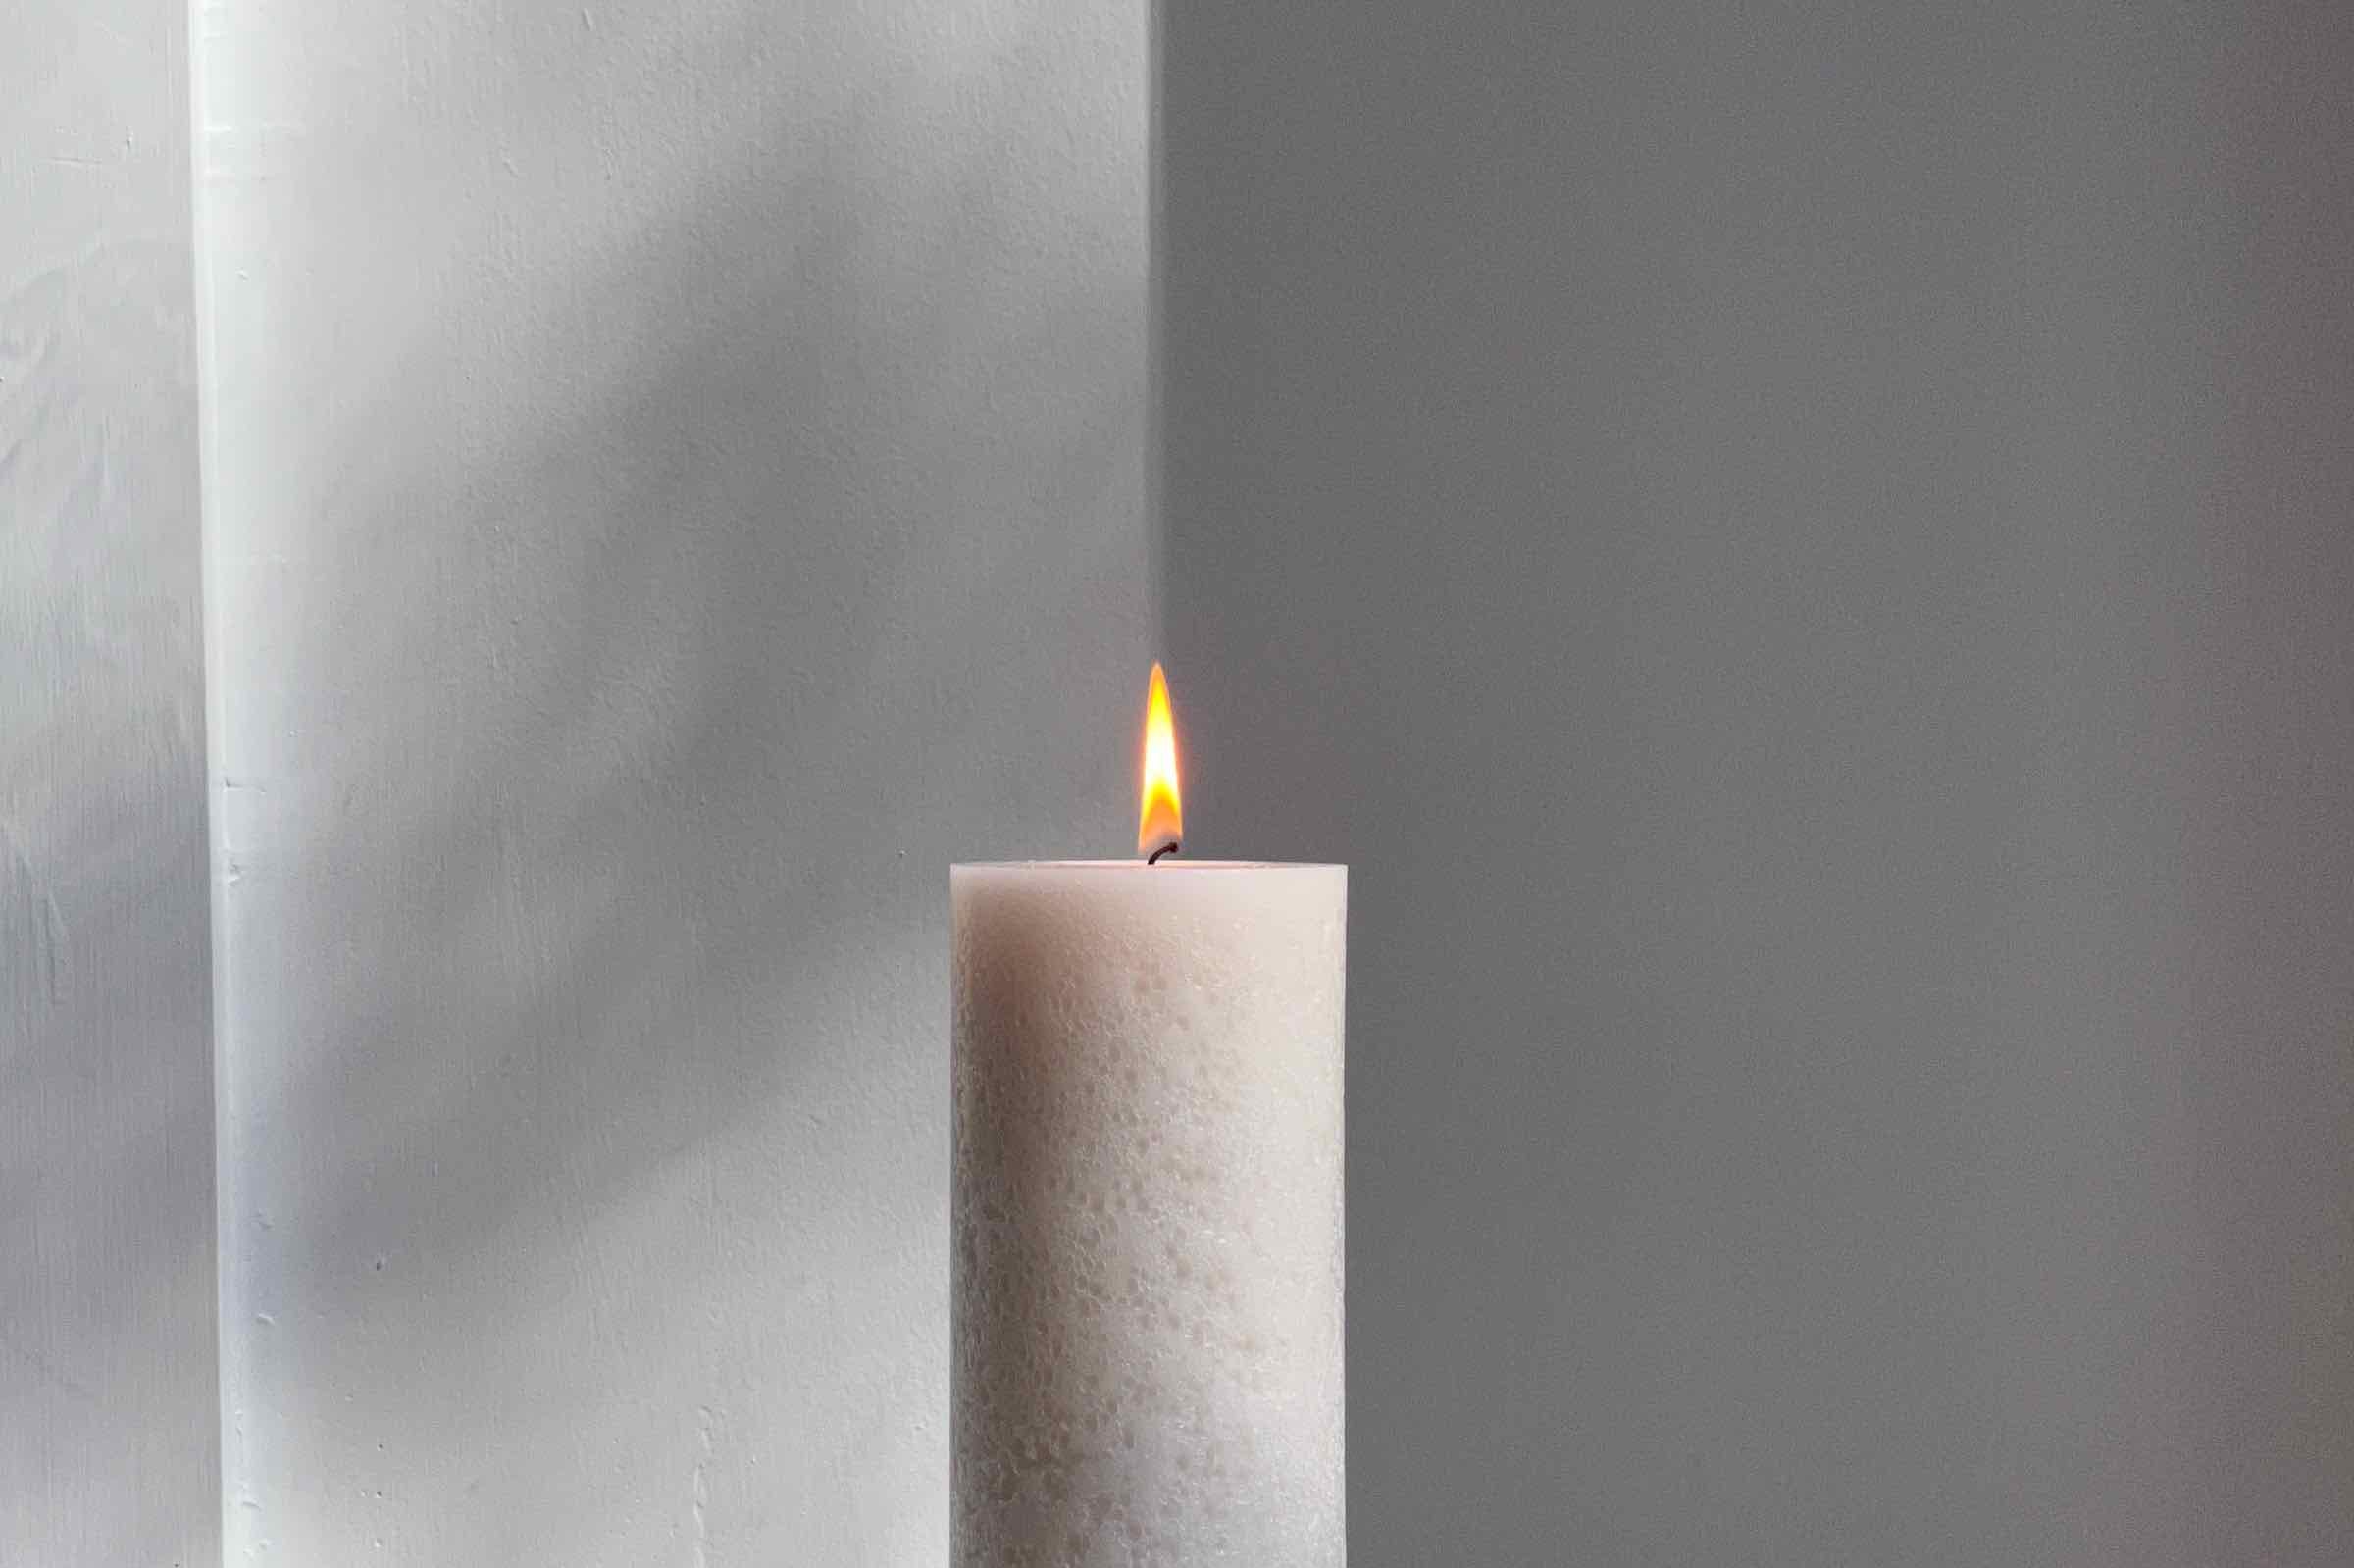 visible light - Why is the bottom part of a candle flame blue